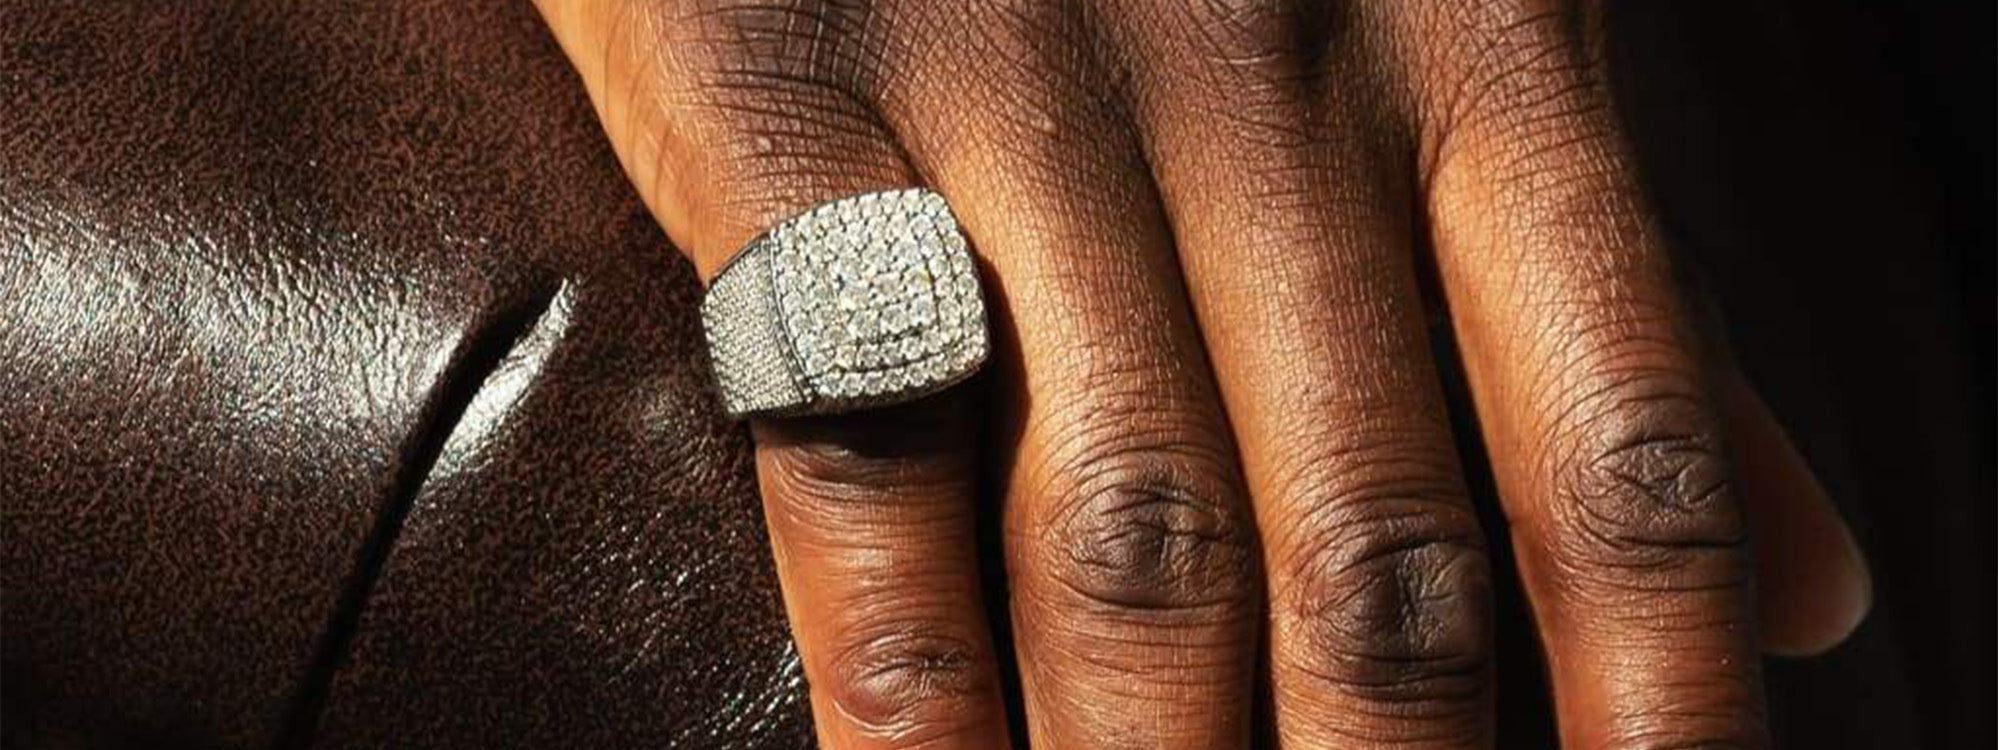 What Does a Pinky Ring Mean on a Man?